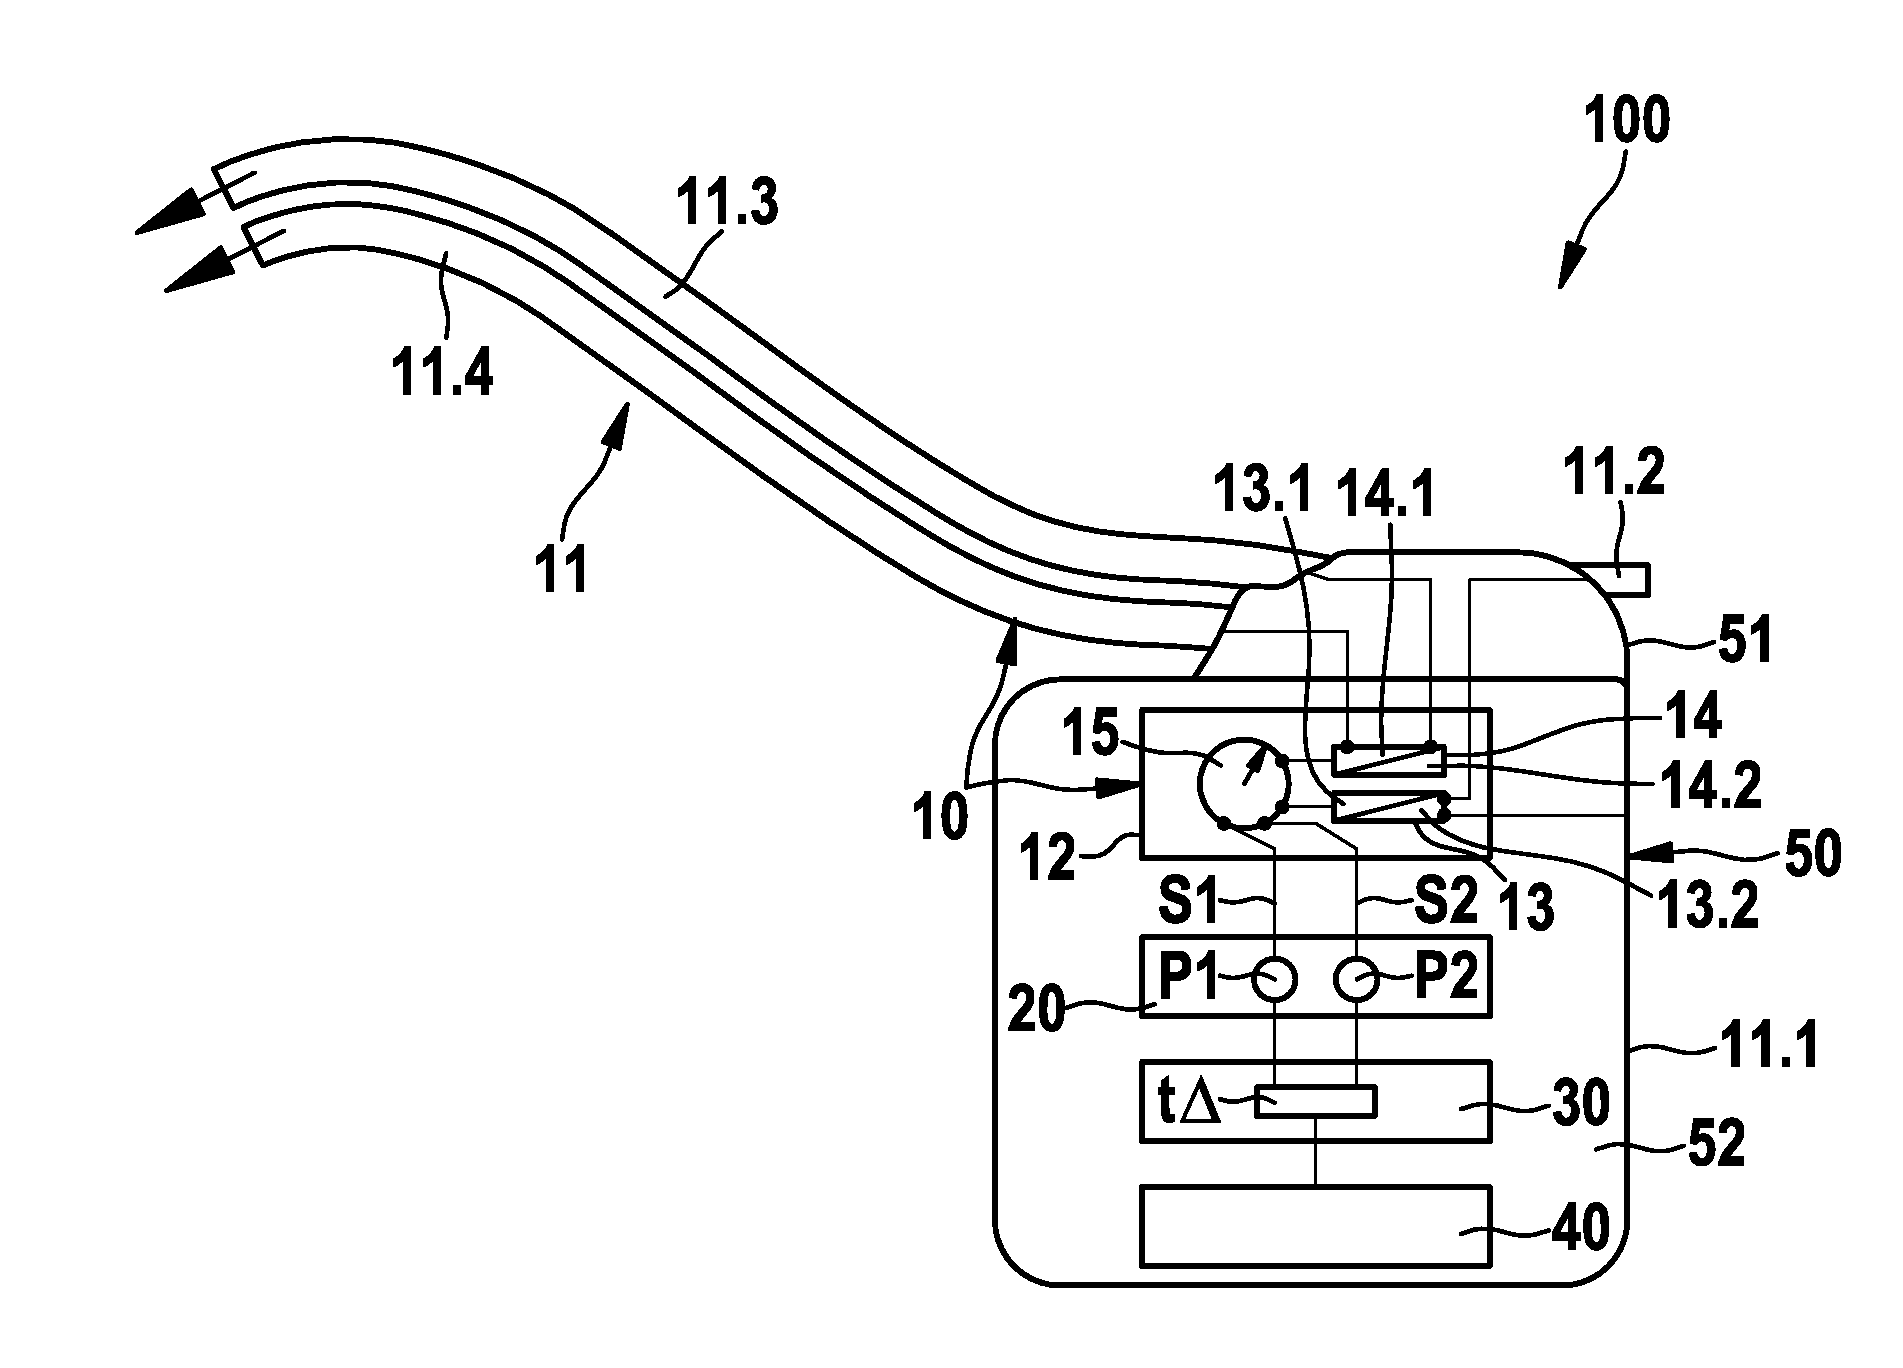 Electromedical implant and monitoring system including the electromedical implant